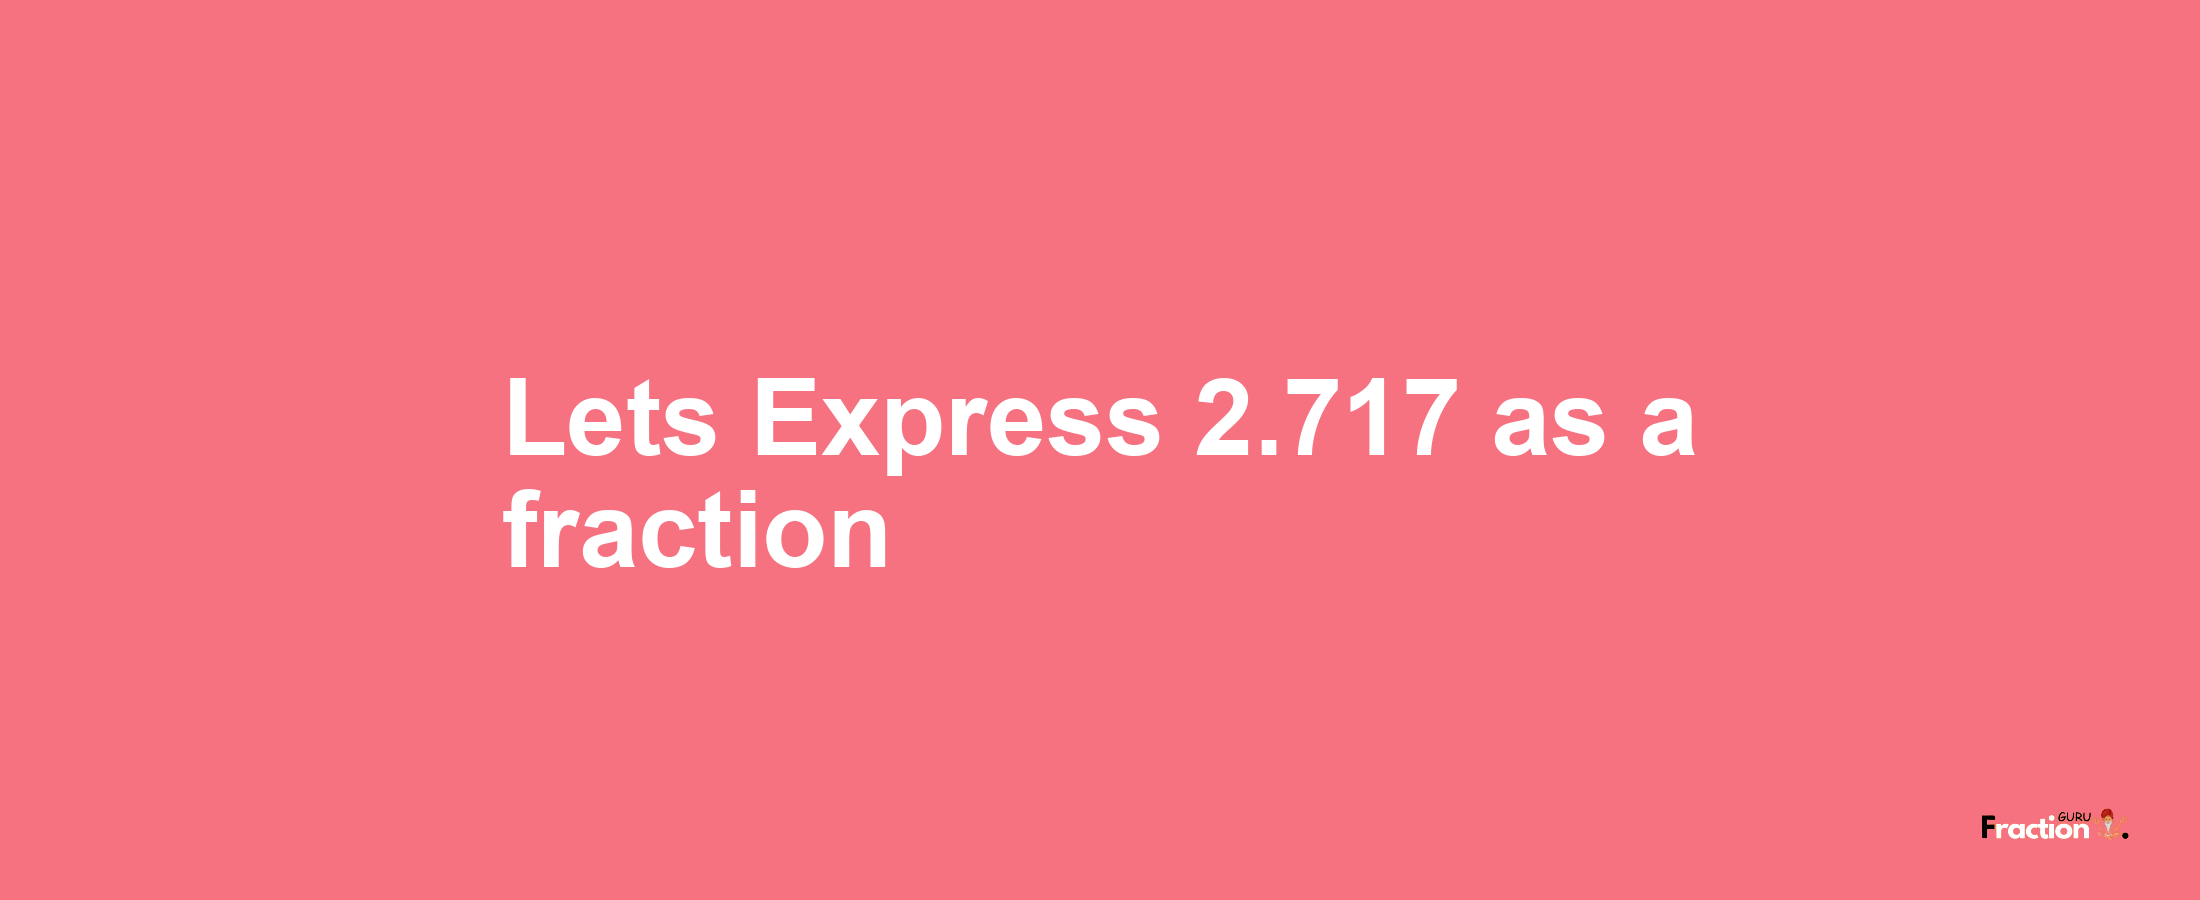 Lets Express 2.717 as afraction